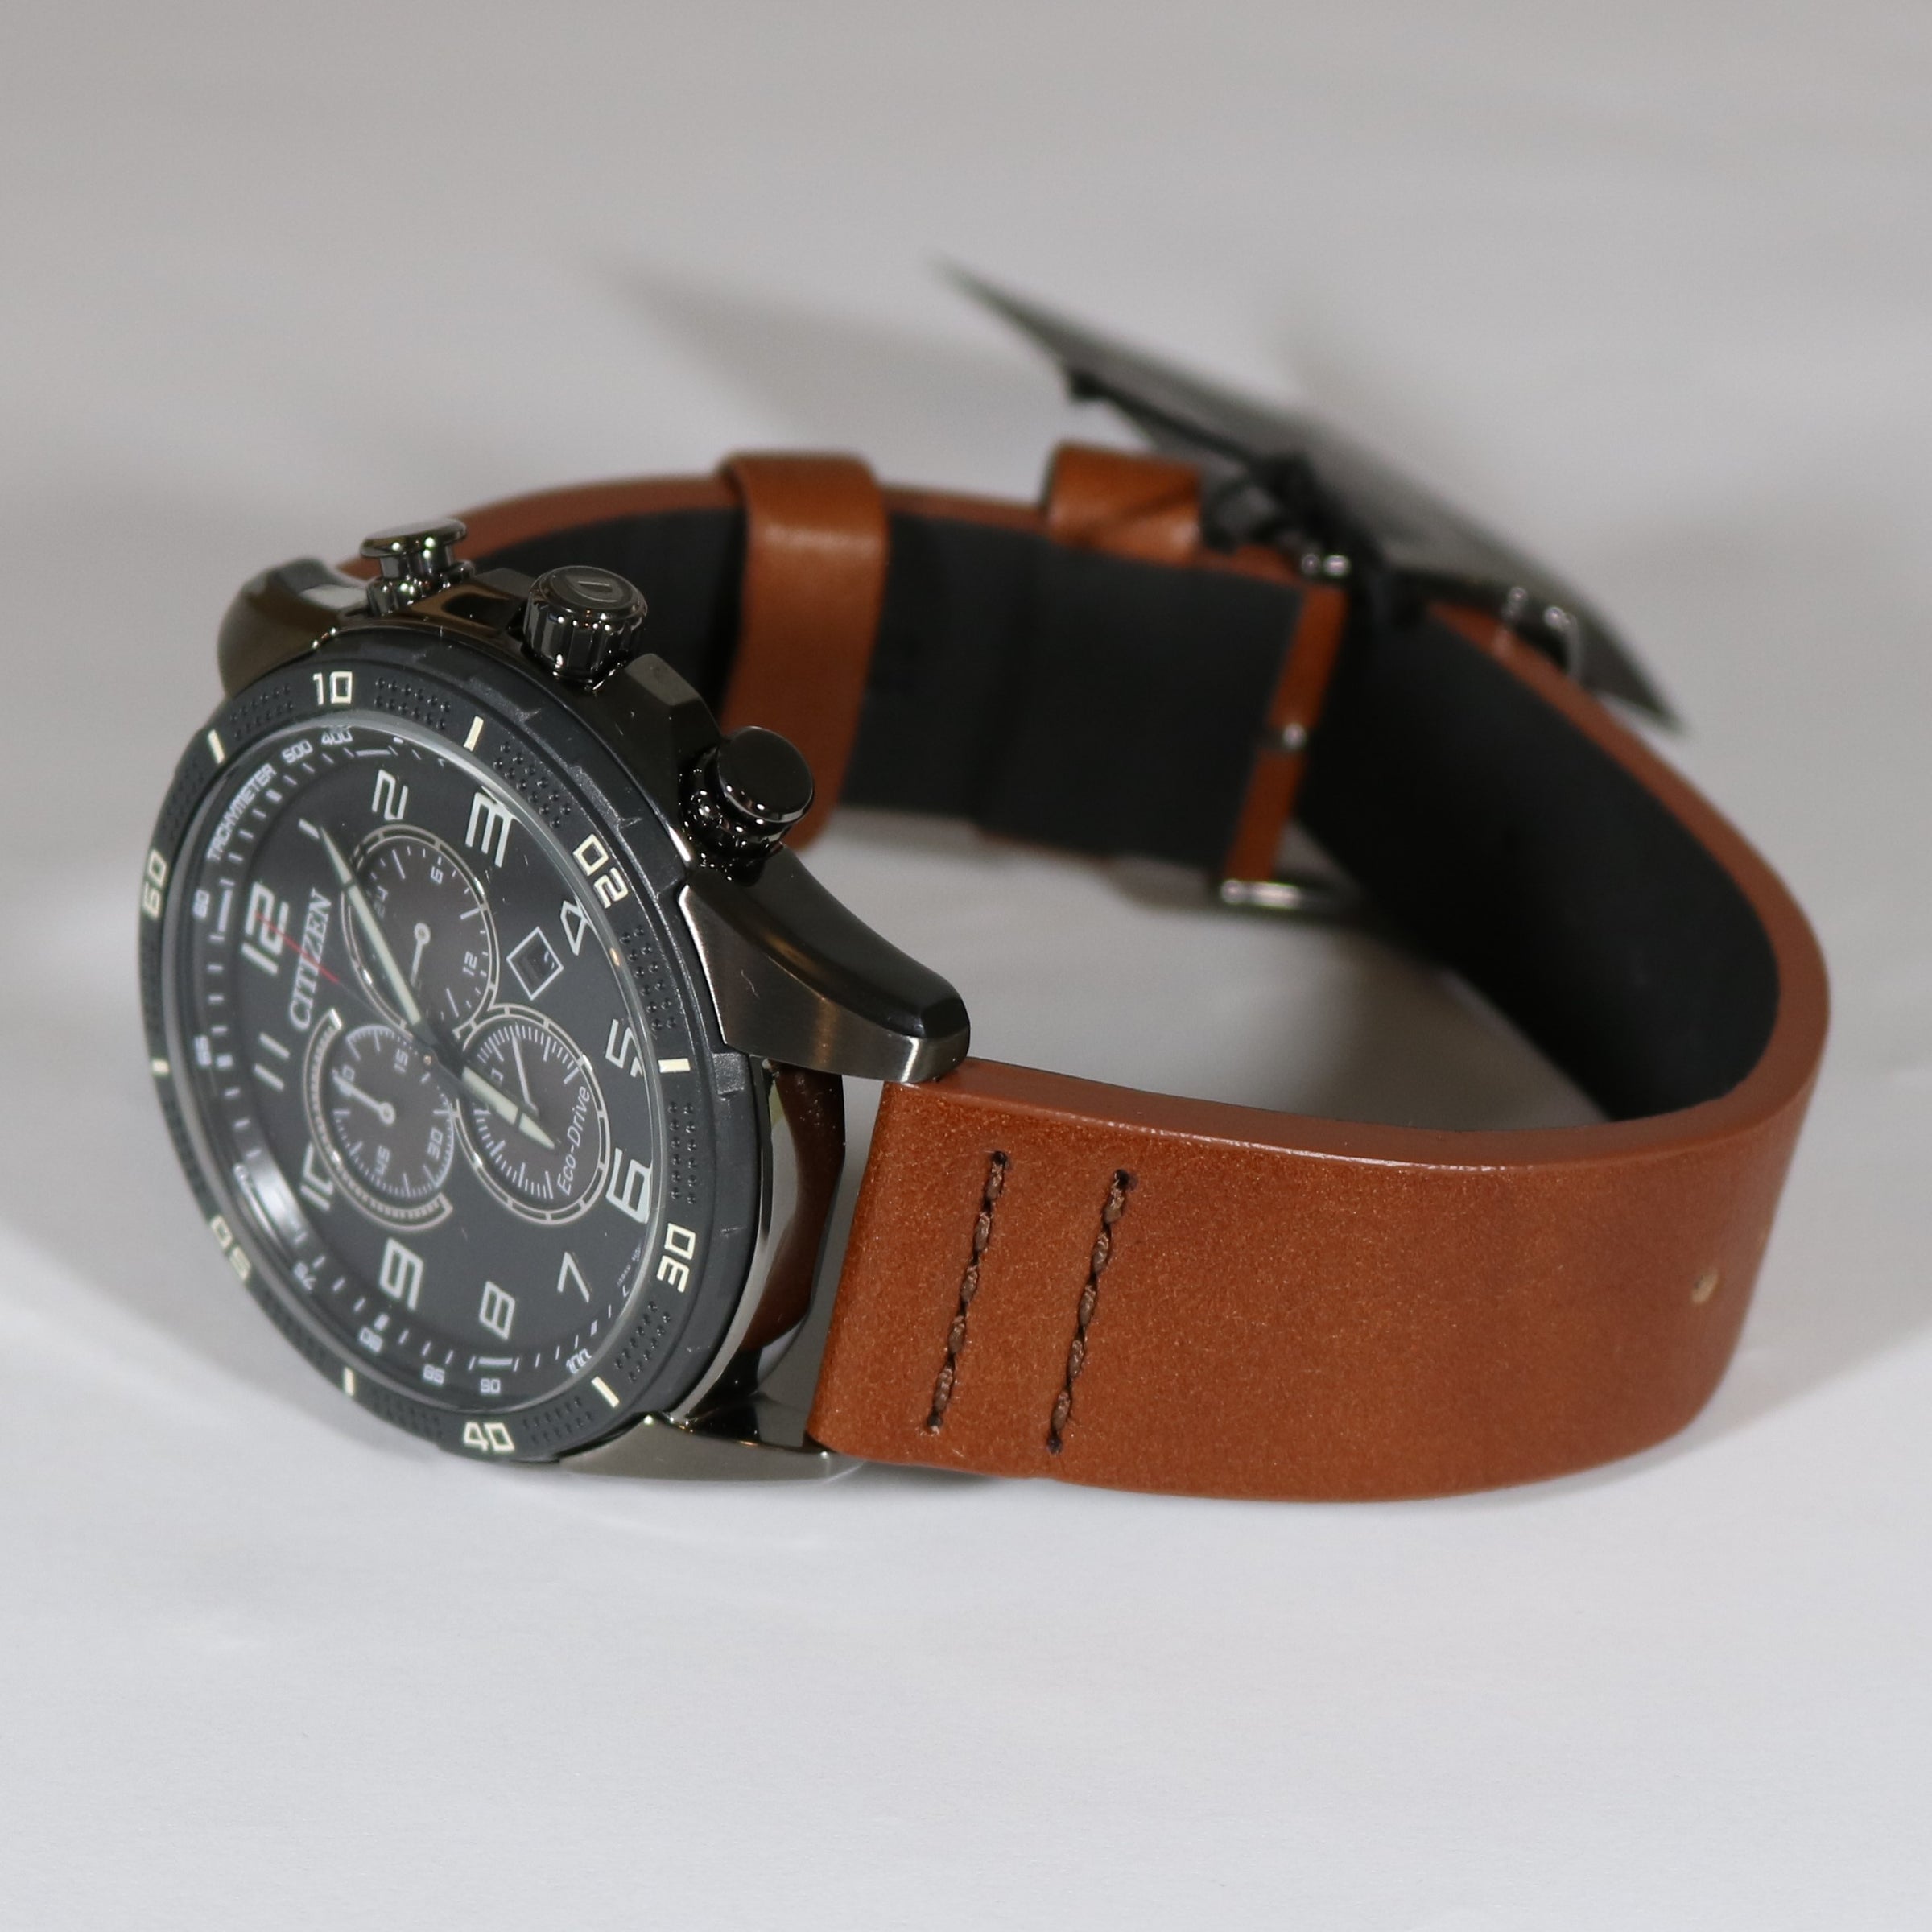 Citizen Black AR Stainless Steel Eco Drive Chronograph Watch